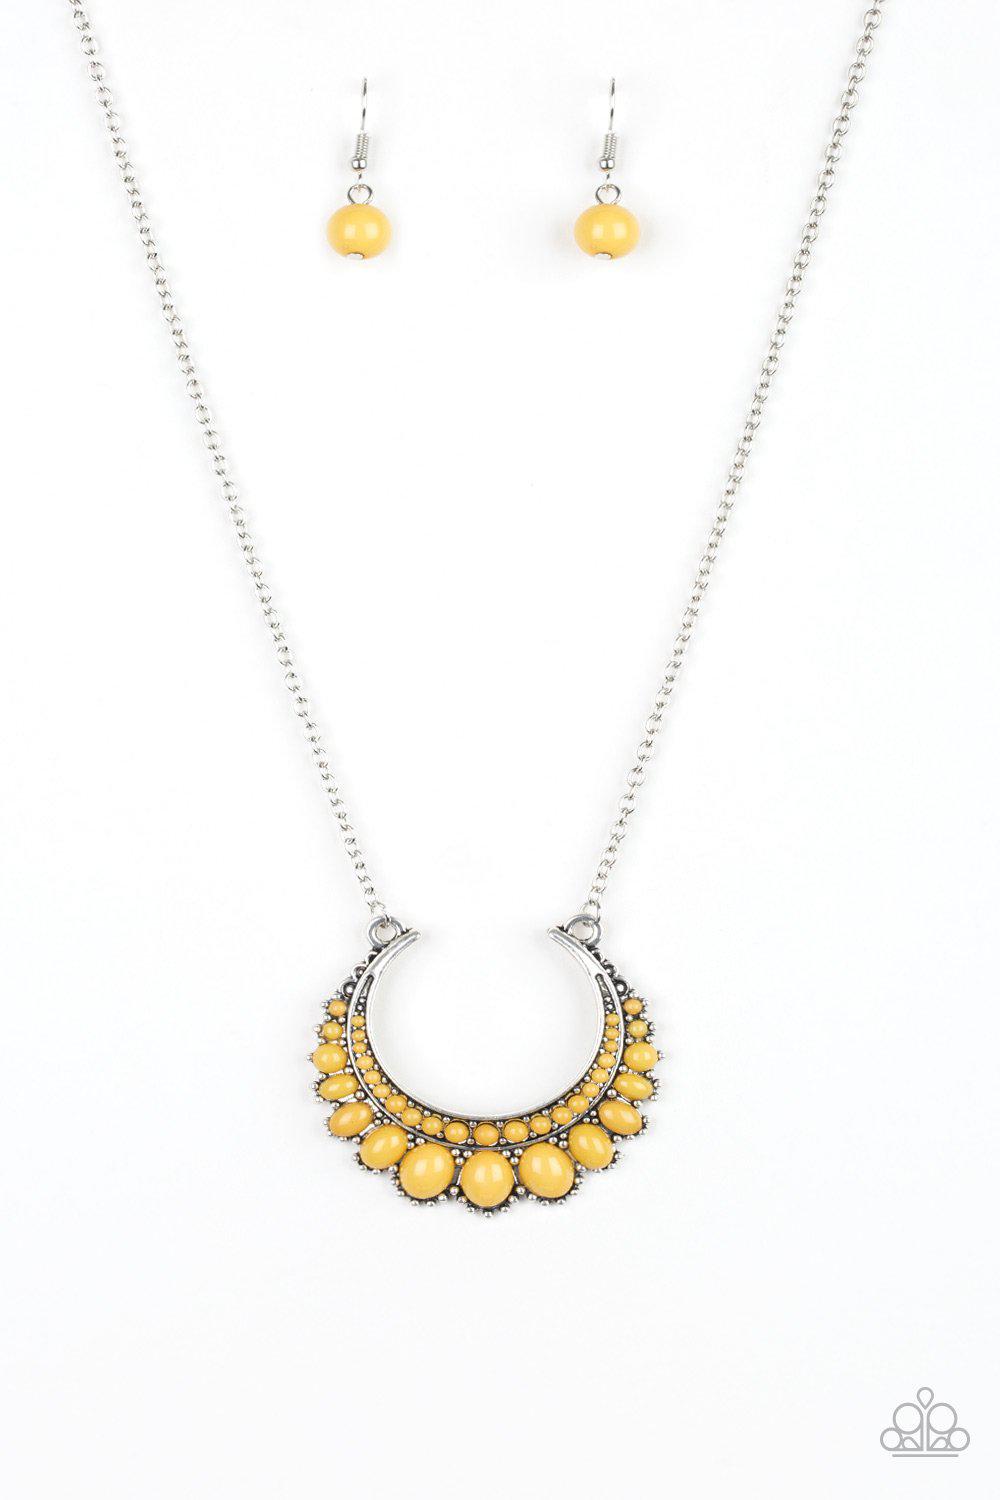 Count To Zen Silver and Yellow Necklace - Paparazzi Accessories-CarasShop.com - $5 Jewelry by Cara Jewels